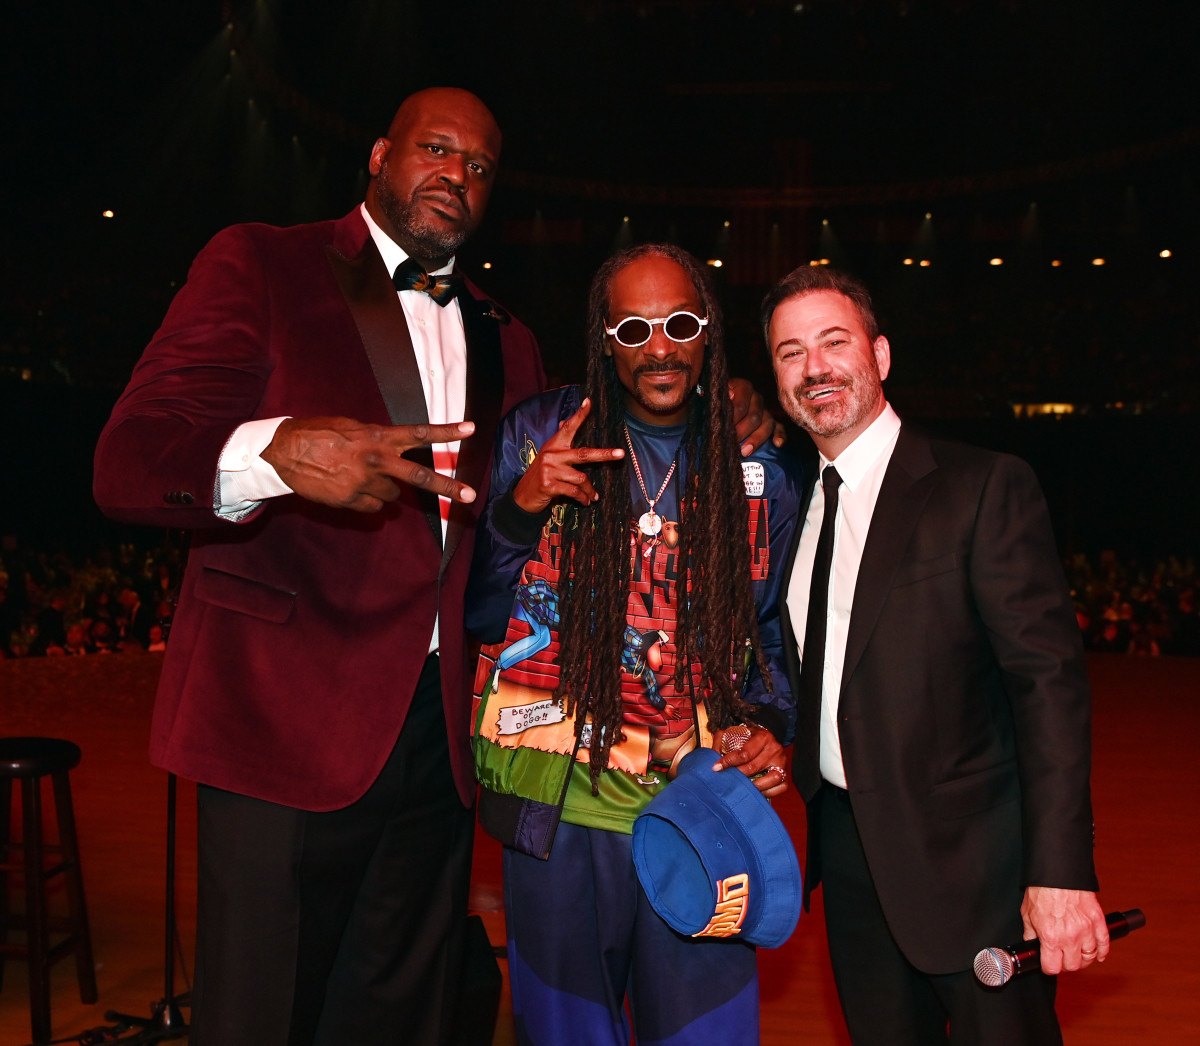 Shaq, Snoop Dogg and Jimmy Kimmel pose for the cameras at last year's event.